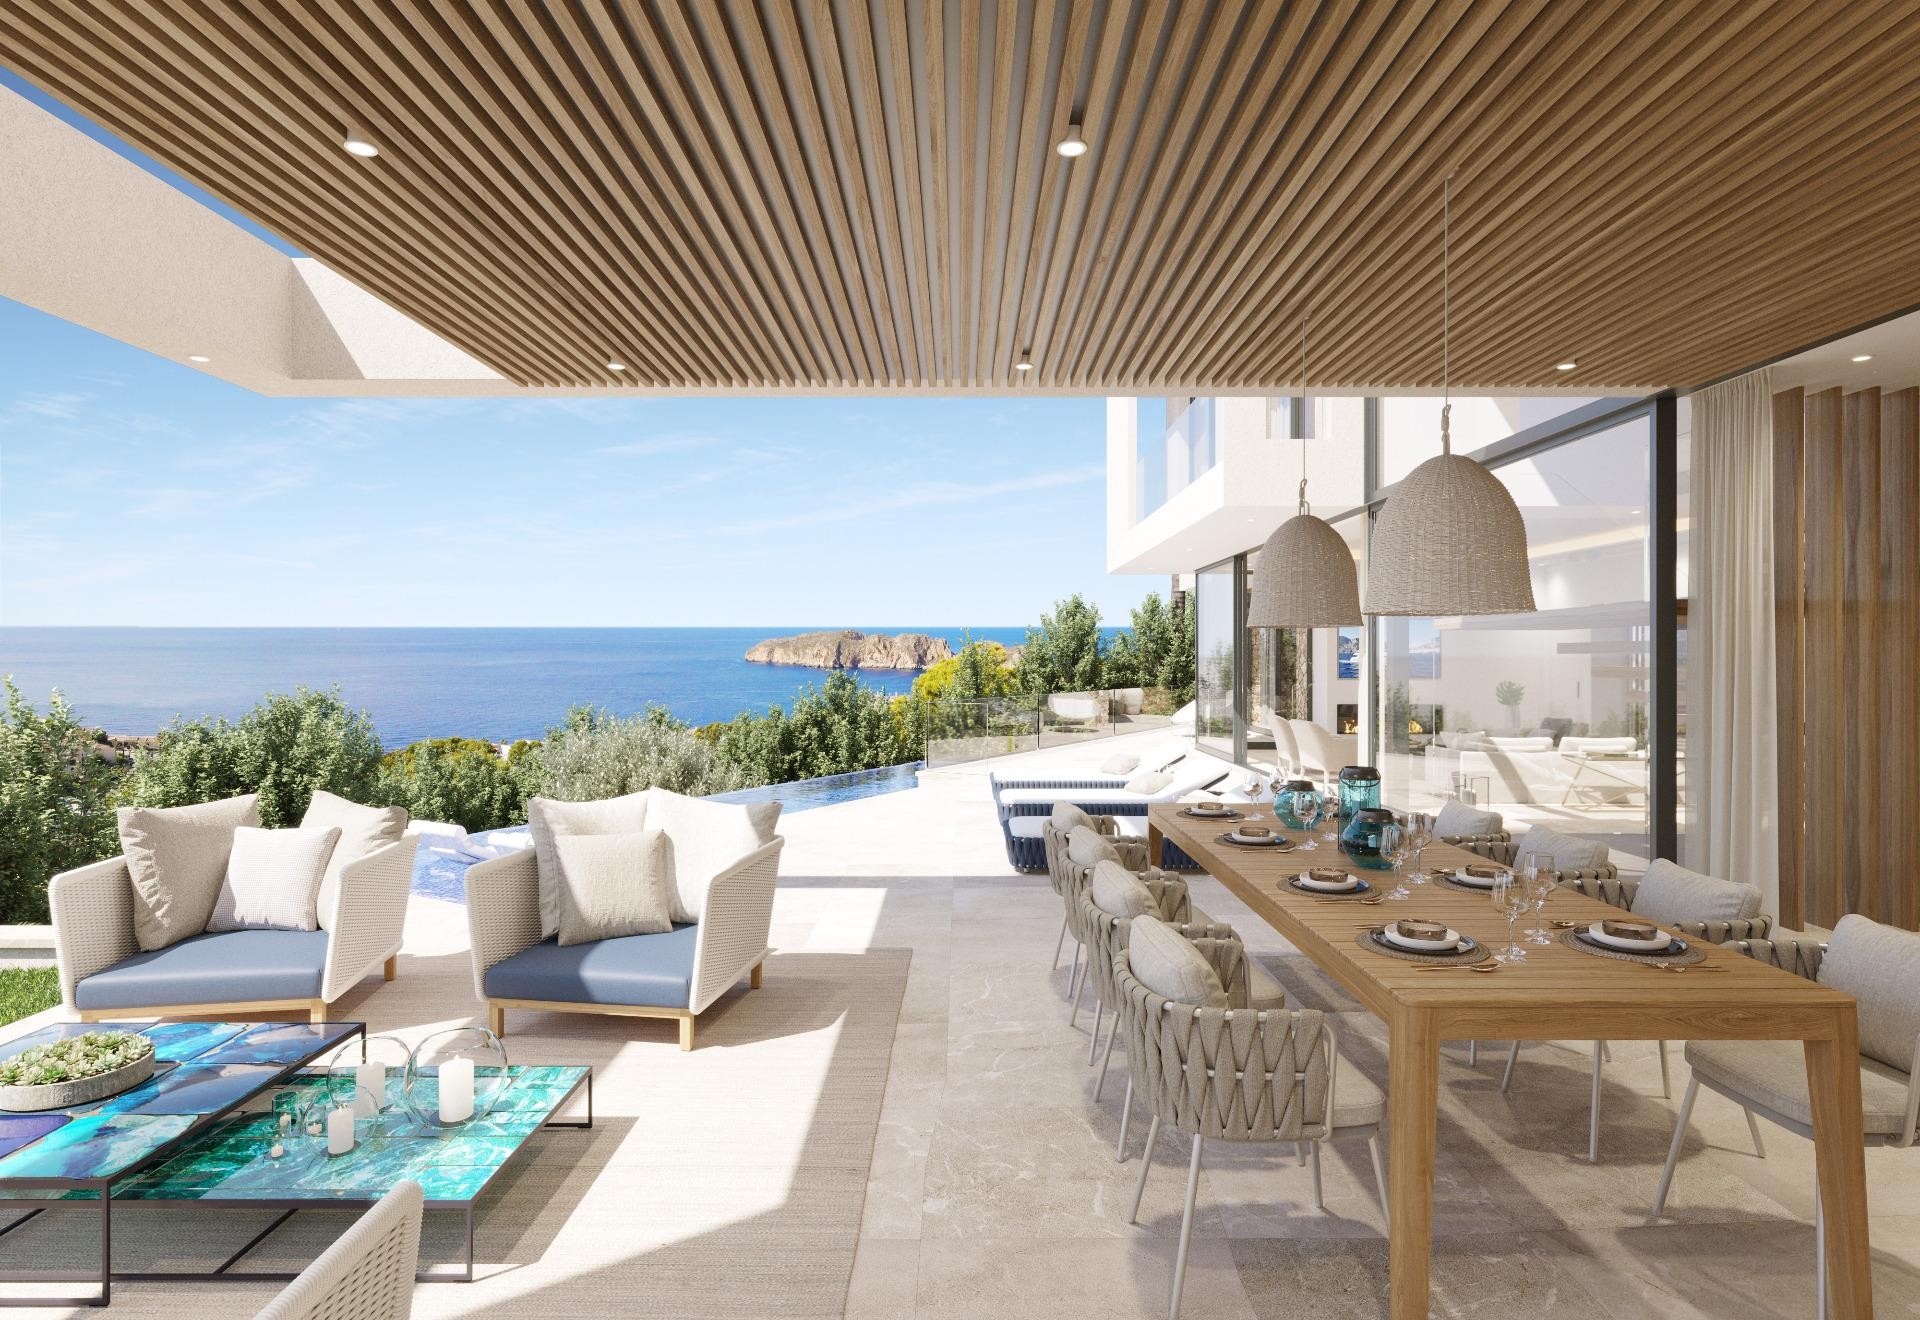 Designer villa project with spectacular sea views in exclusive residential area